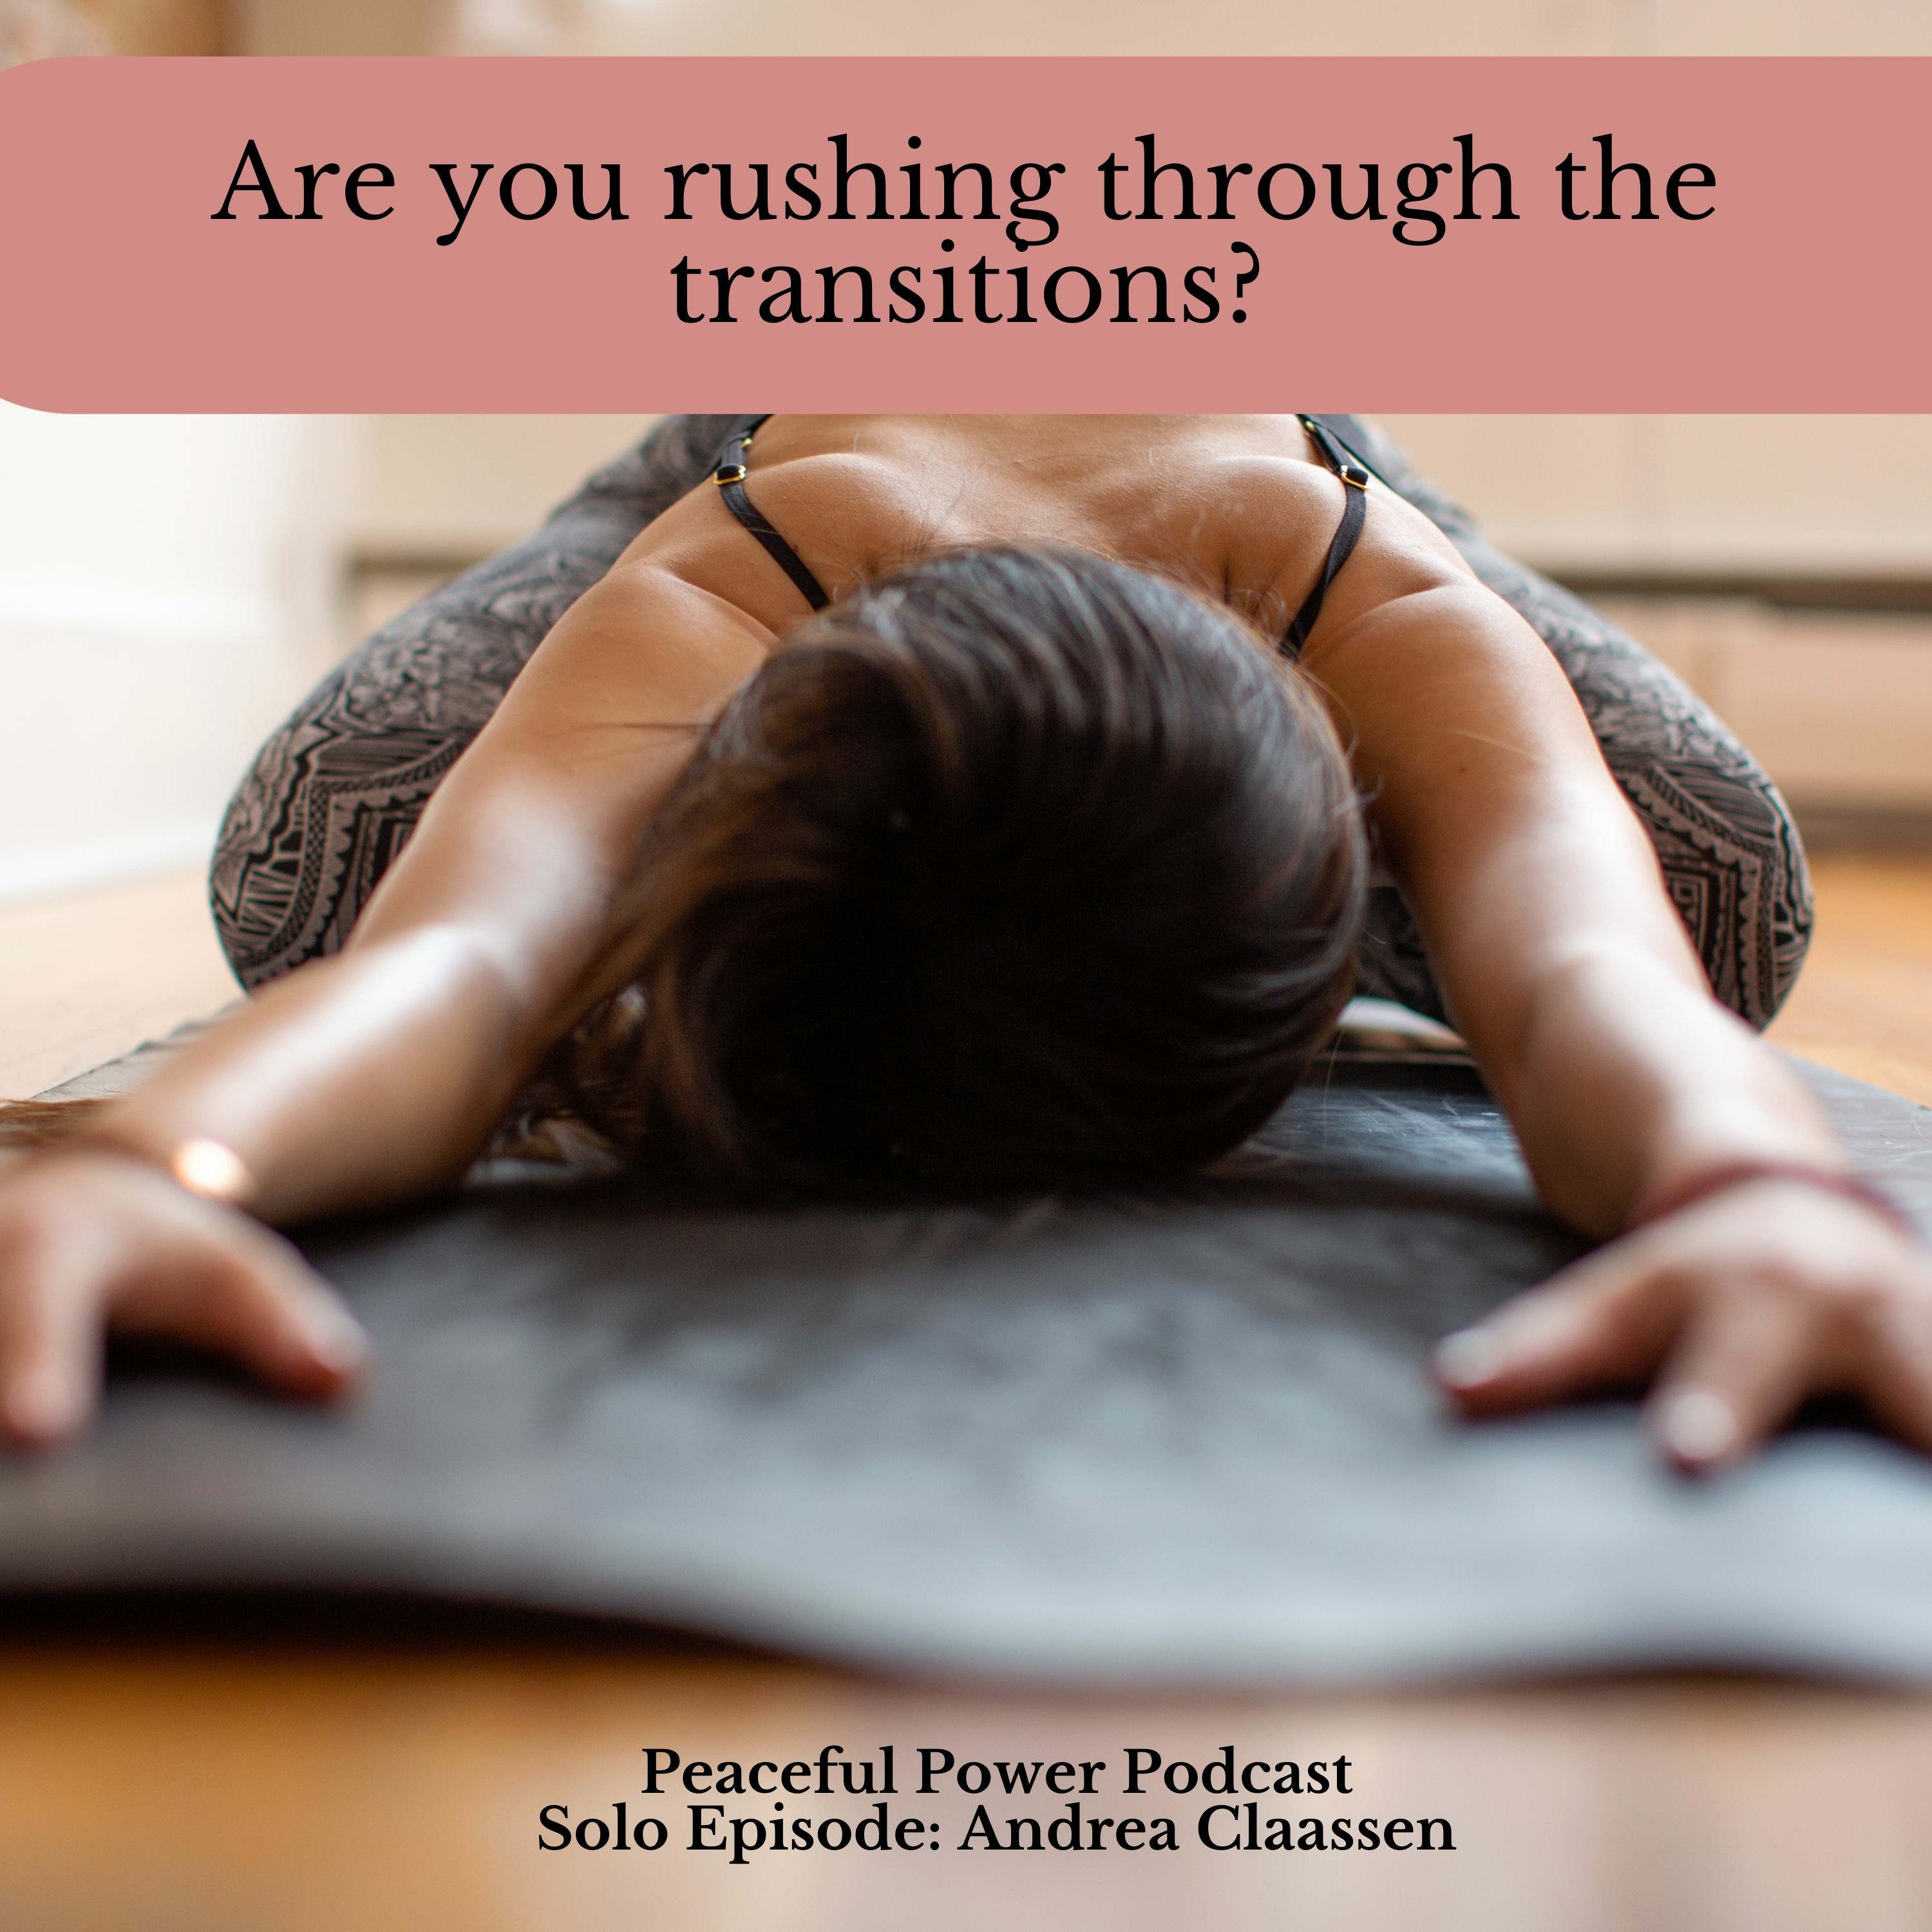 Are you Rushing Through the Transitions?